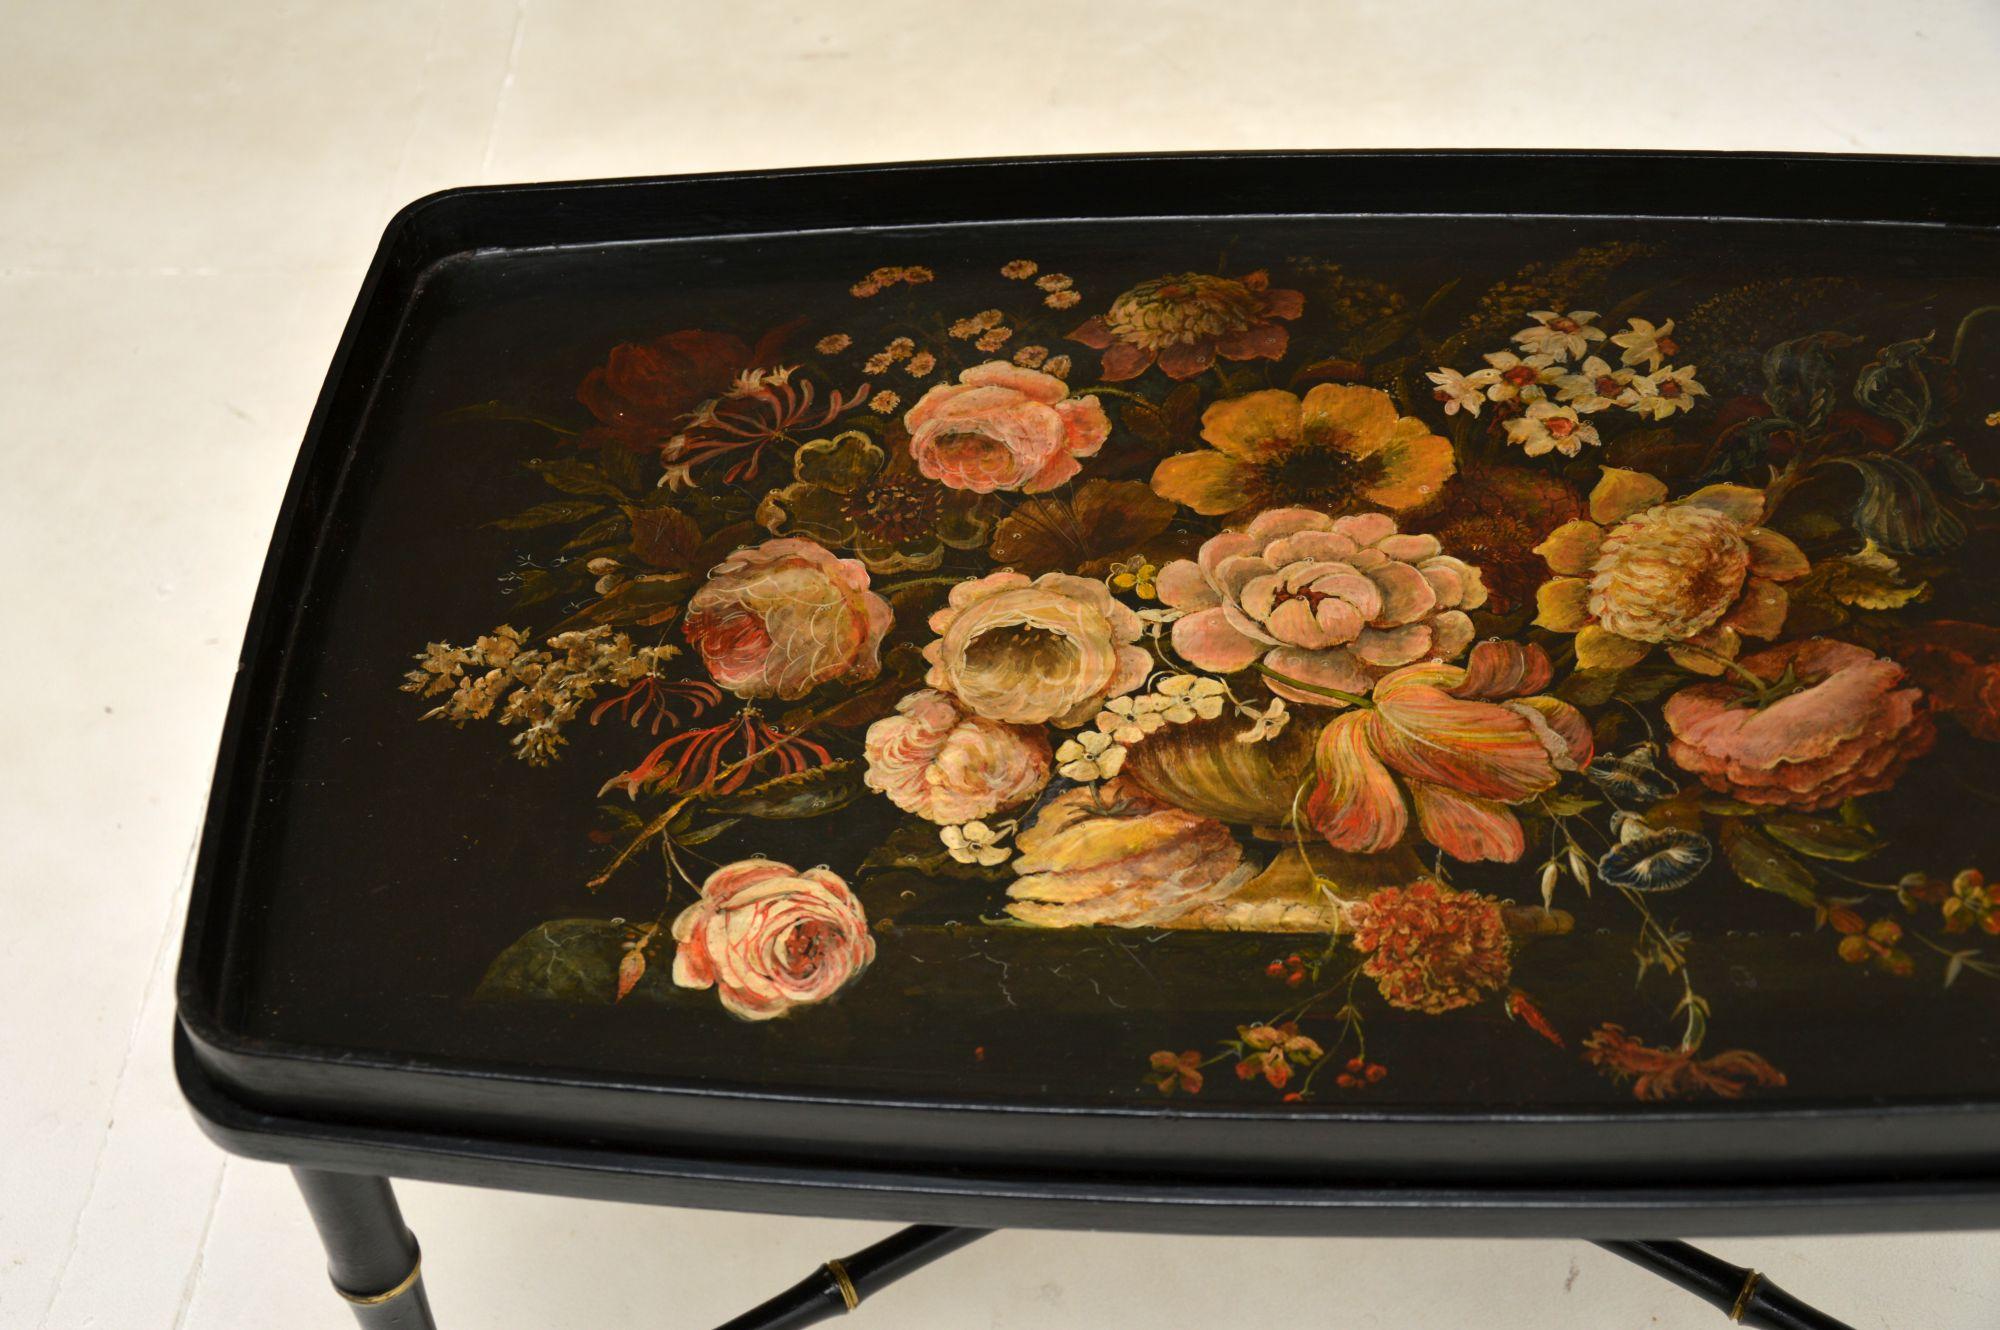 Wood Antique Regency Style Lacquered Tray Top Coffee Table For Sale